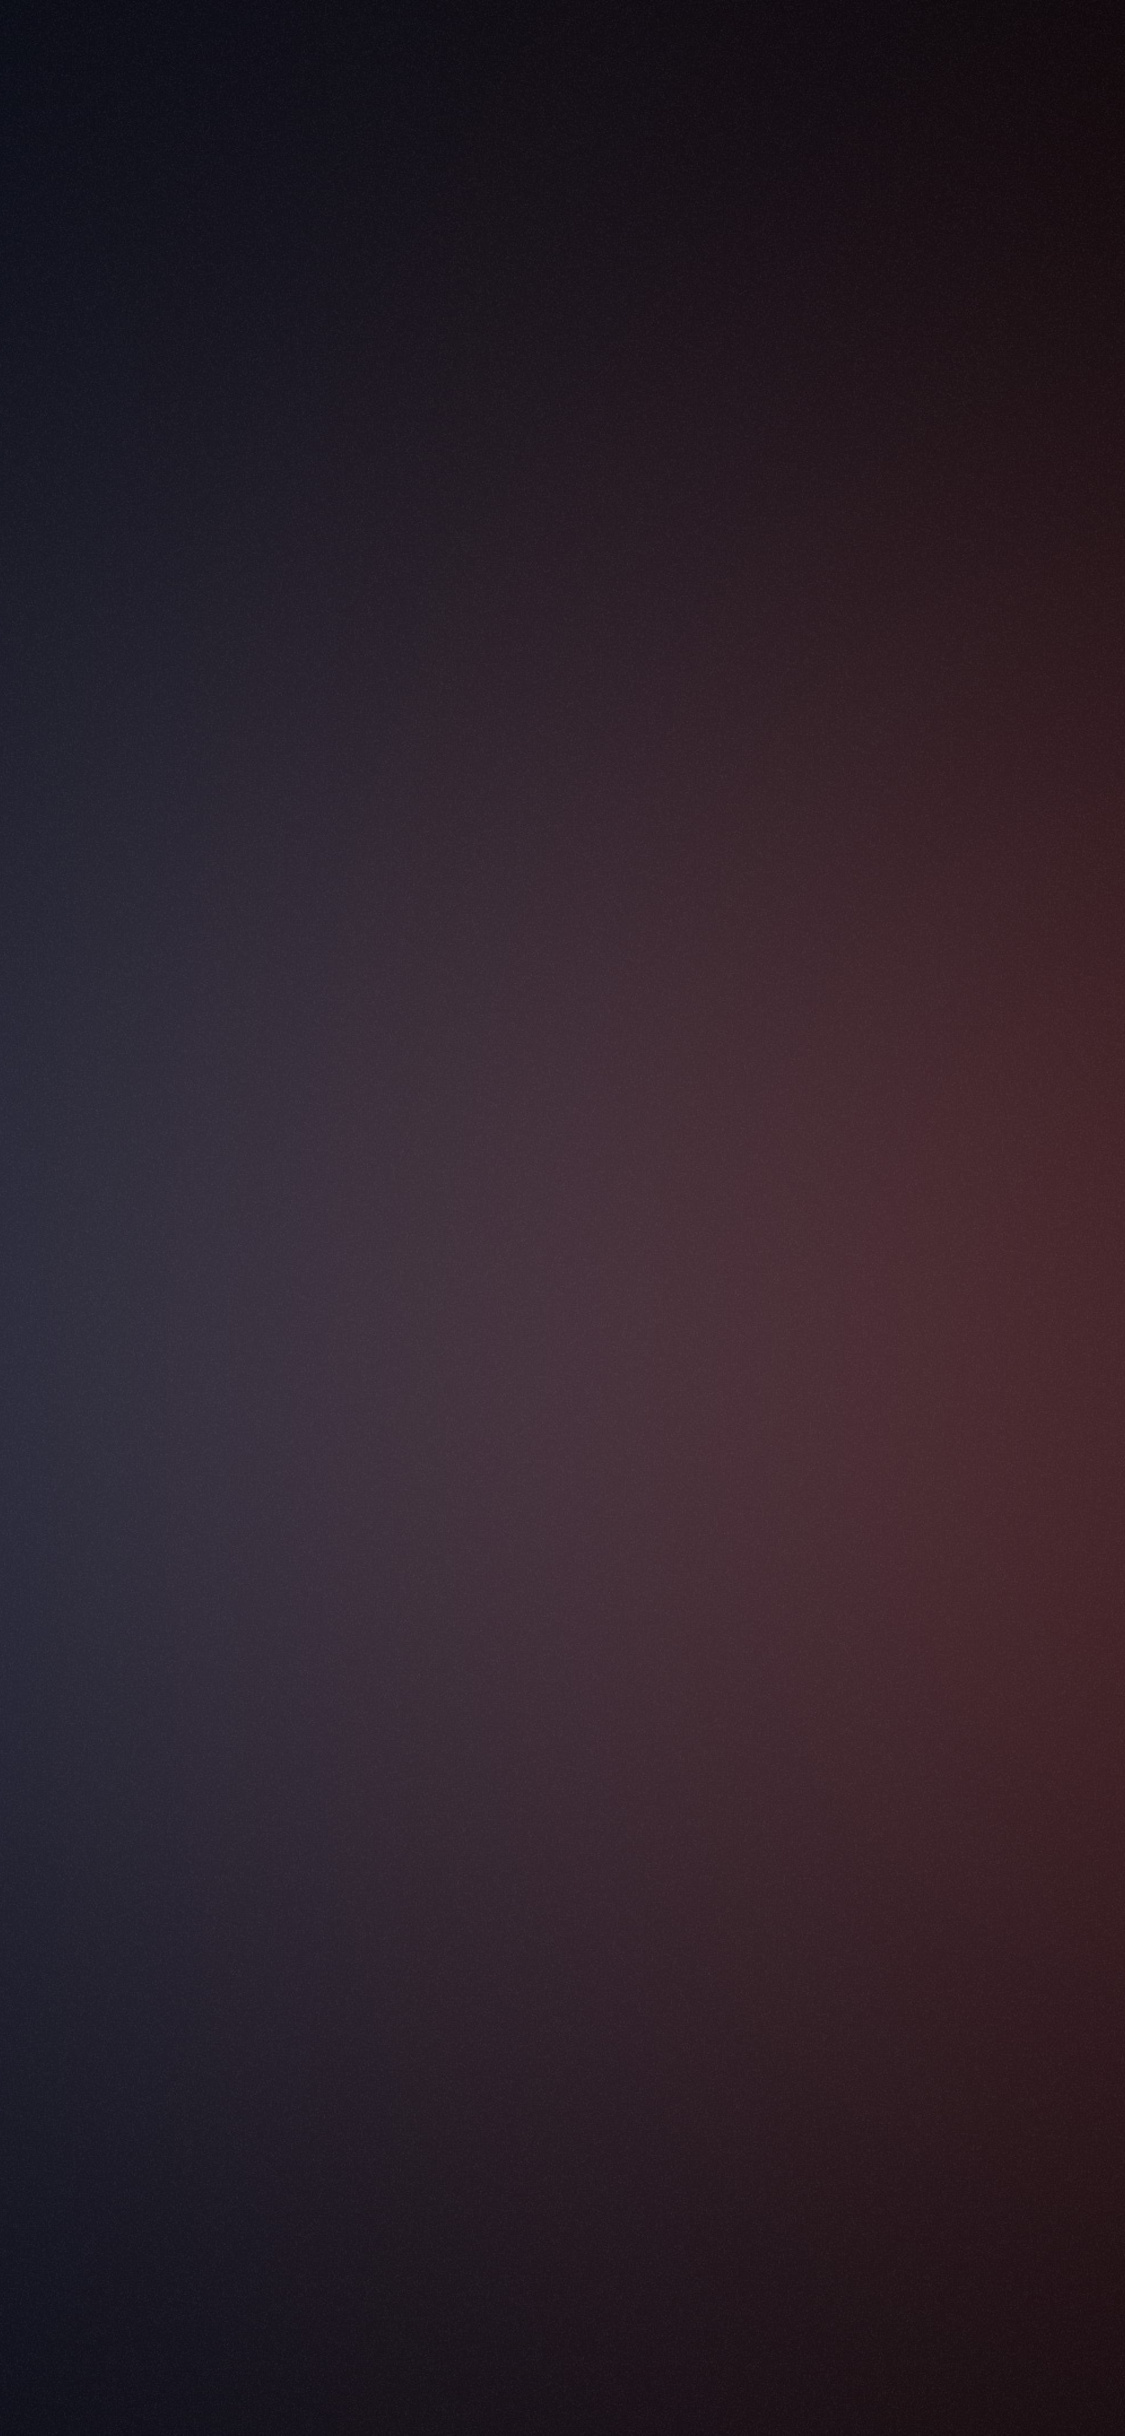 Simple Subtle Abstract Dark Minimalism 4k iPhone XS, iPhone iPhone X HD 4k Wallpaper, Image, Background, Photo and Picture